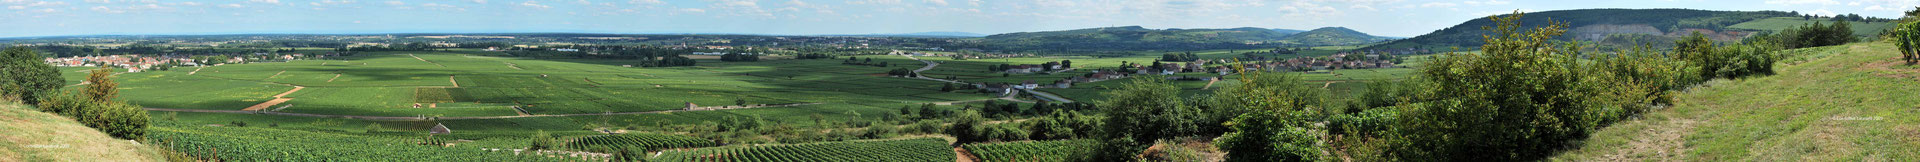 View from the top of le Montrachet Grand Cru